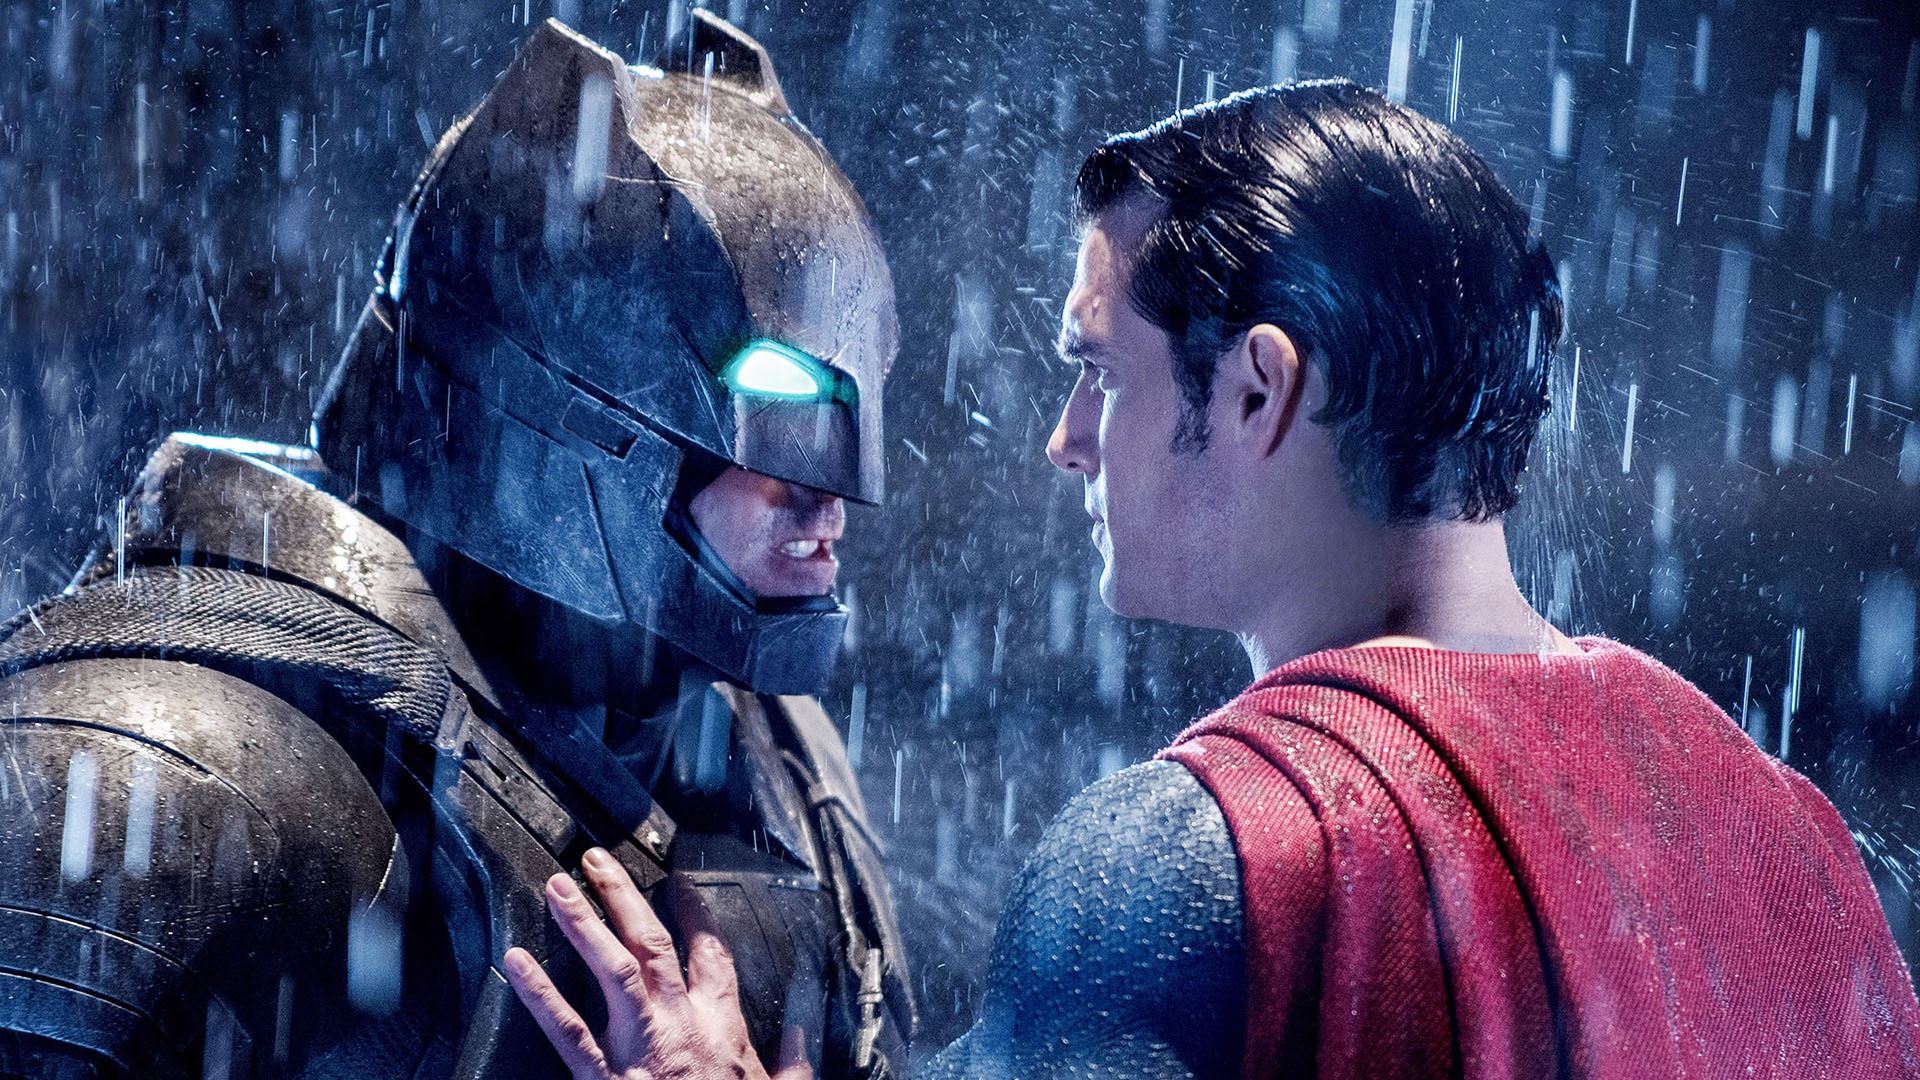 Batman v Superman: Dawn of Justice: Ultimate Edition Trailer - Trailers &  Videos - Rotten Tomatoes